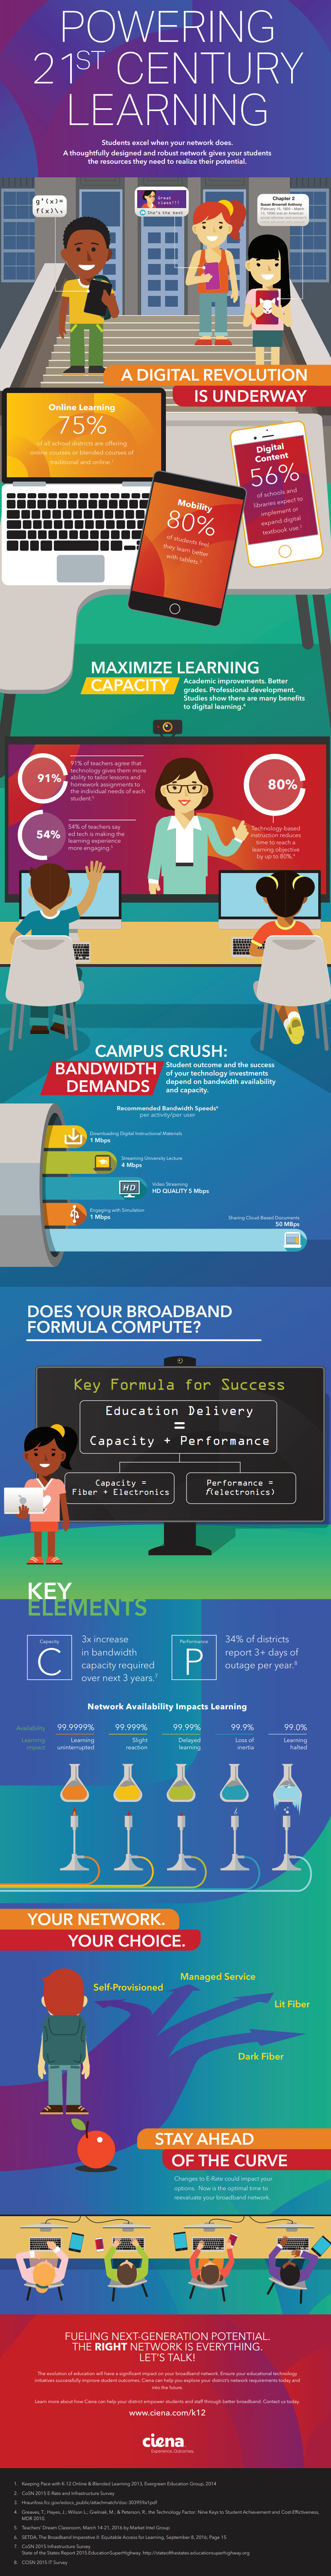 Powering the 21st Century infograph